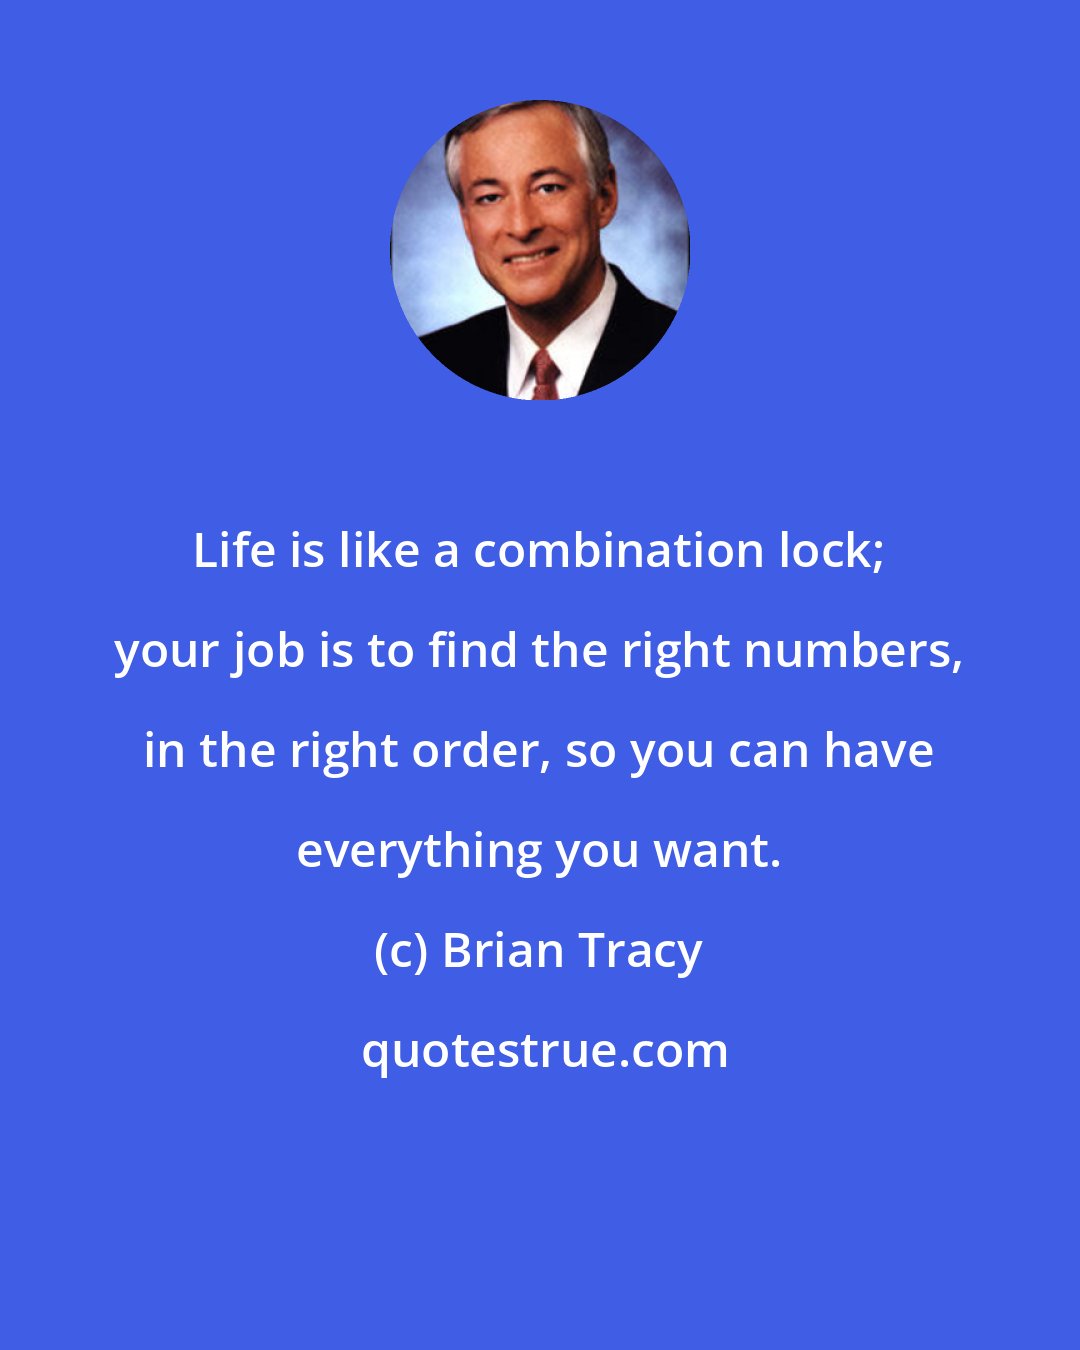 Brian Tracy: Life is like a combination lock; your job is to find the right numbers, in the right order, so you can have everything you want.